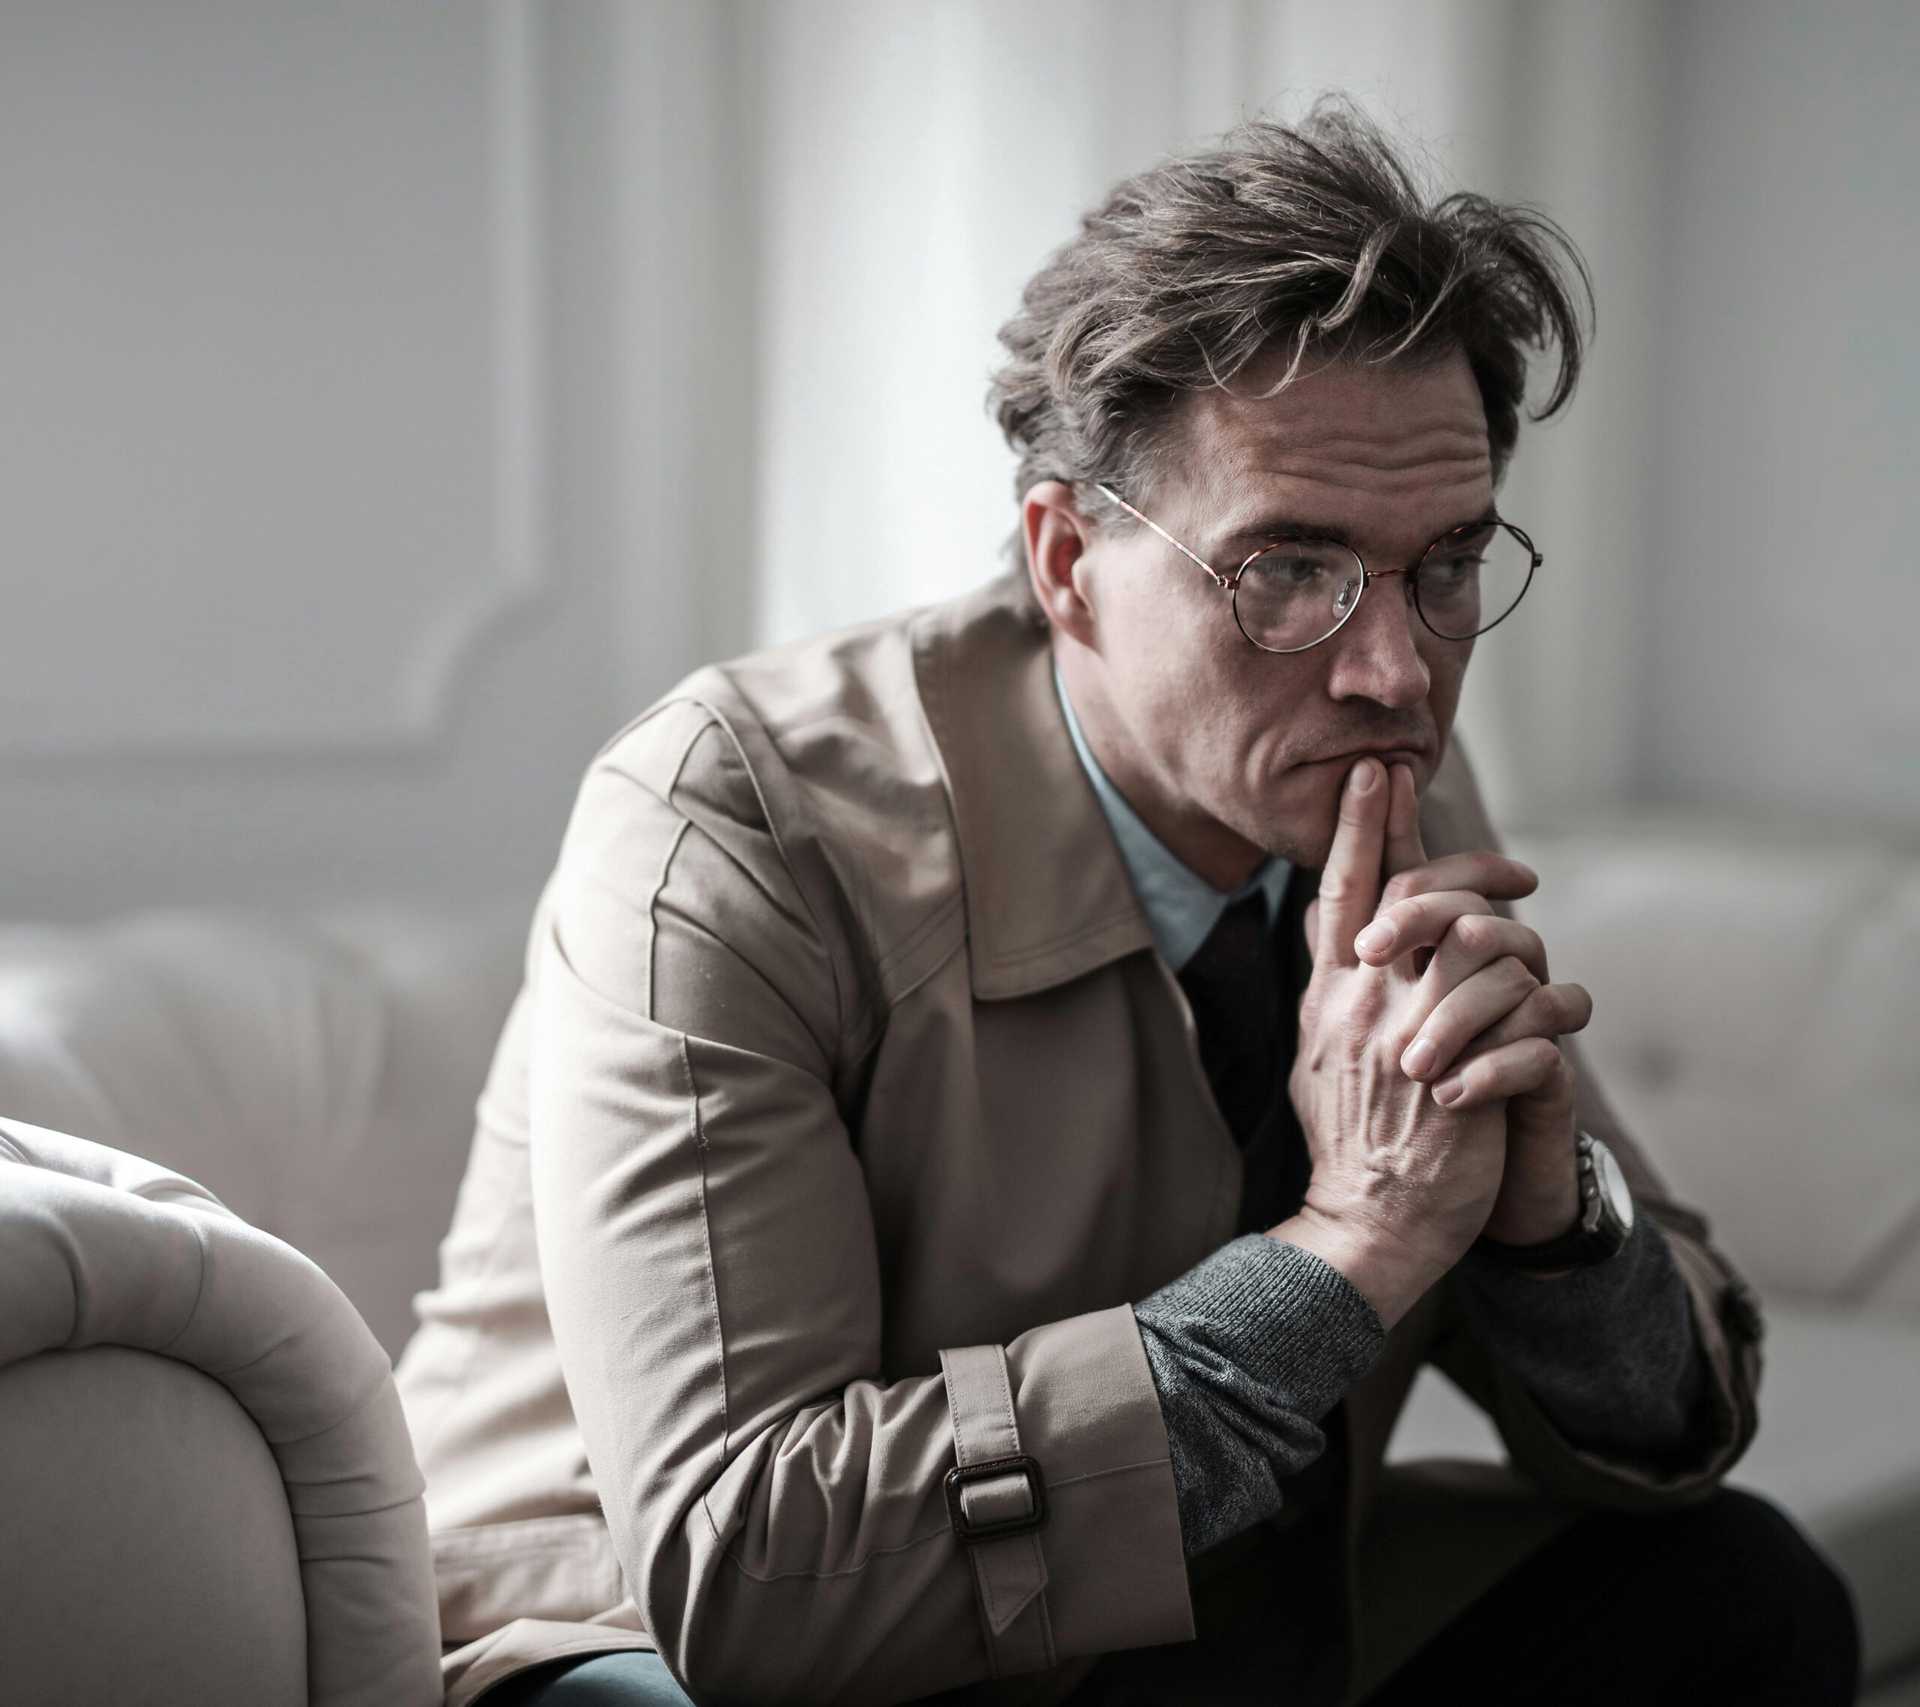 A man in a trench coat sits on a couch, leaning forward. He is deep in reflection.